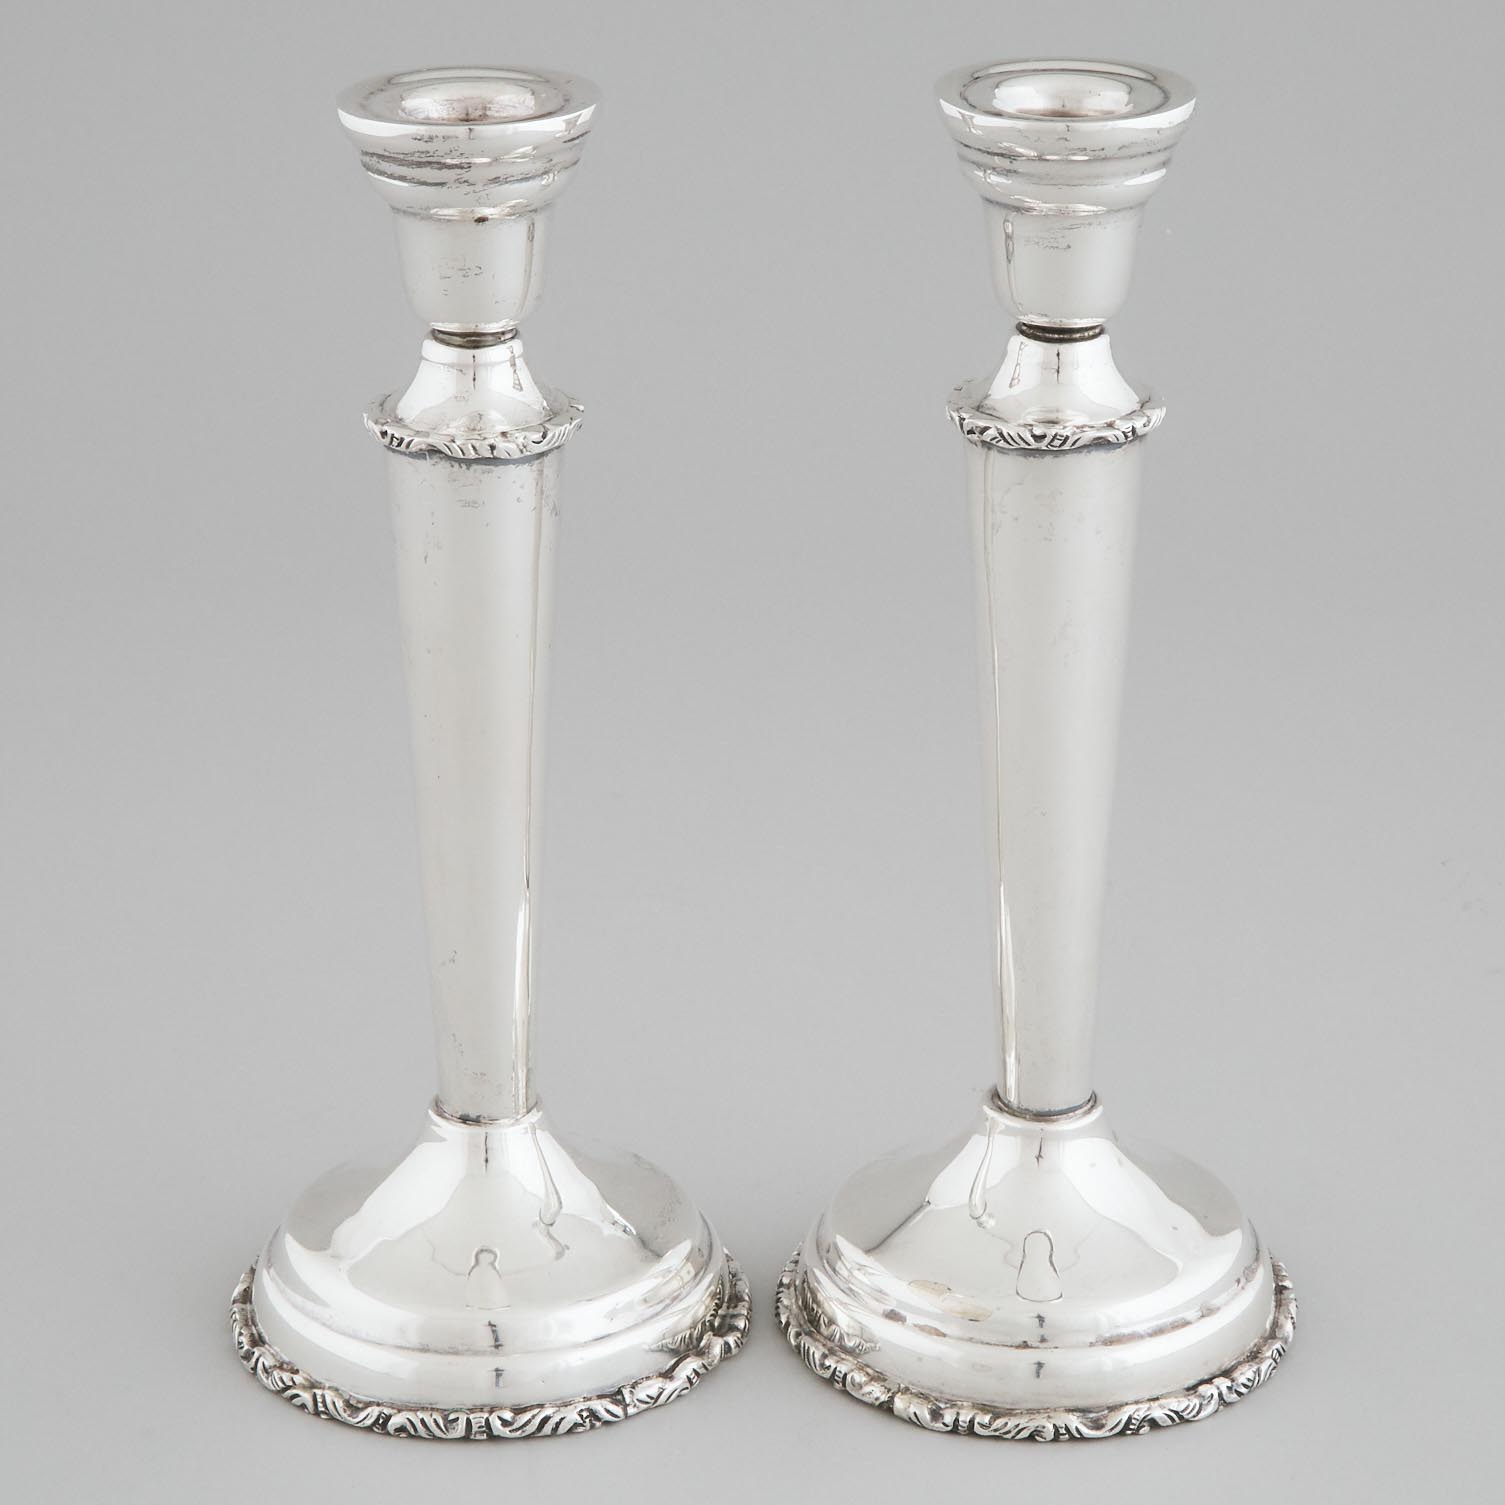 Pair of Mexican Silver Table Candlesticks  3ac04c